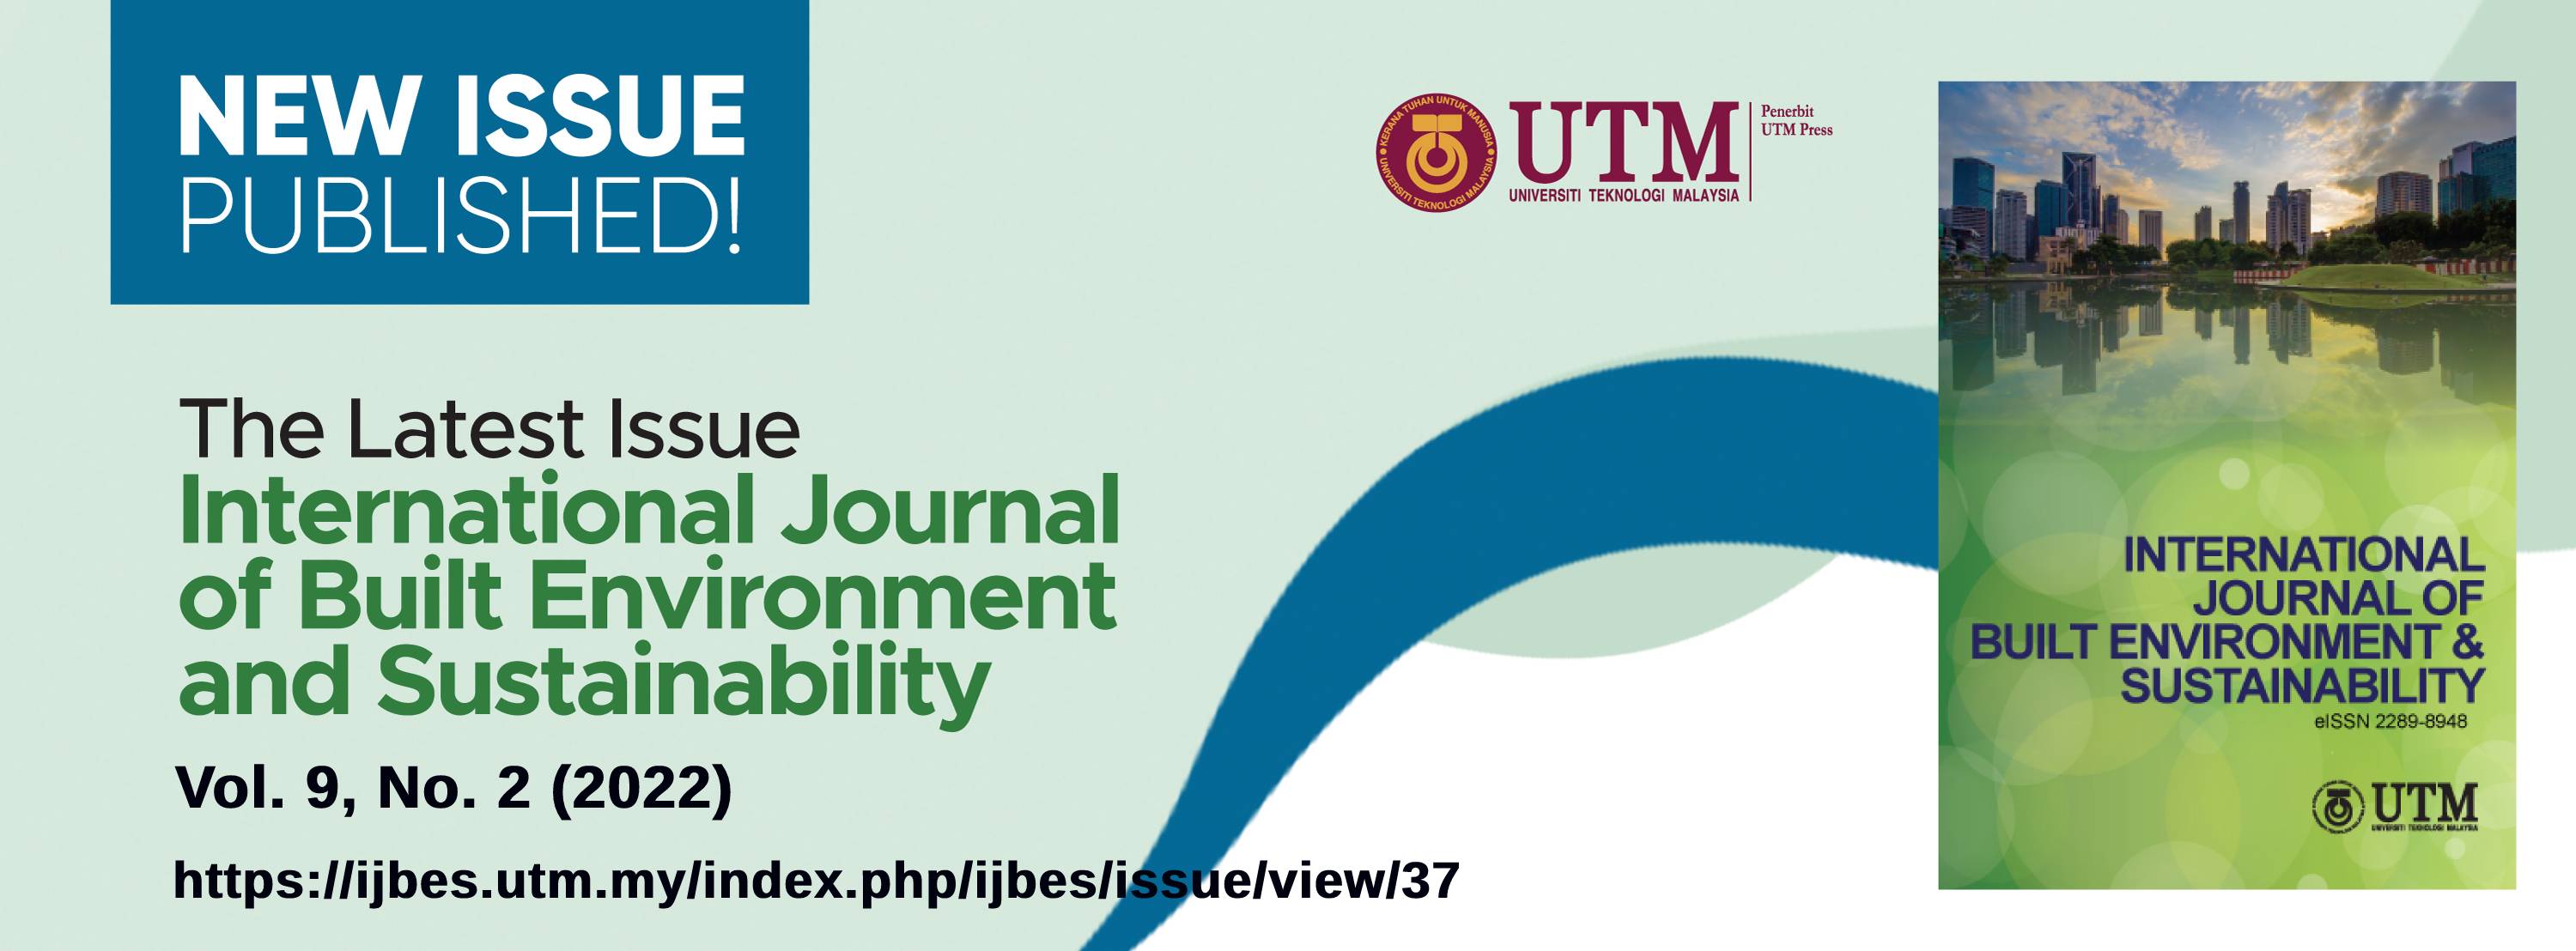 					View Vol. 9 No. 2 (2022): International Journal of Built Environment and Sustainability, Volume 9, Issue 2, 2022
				